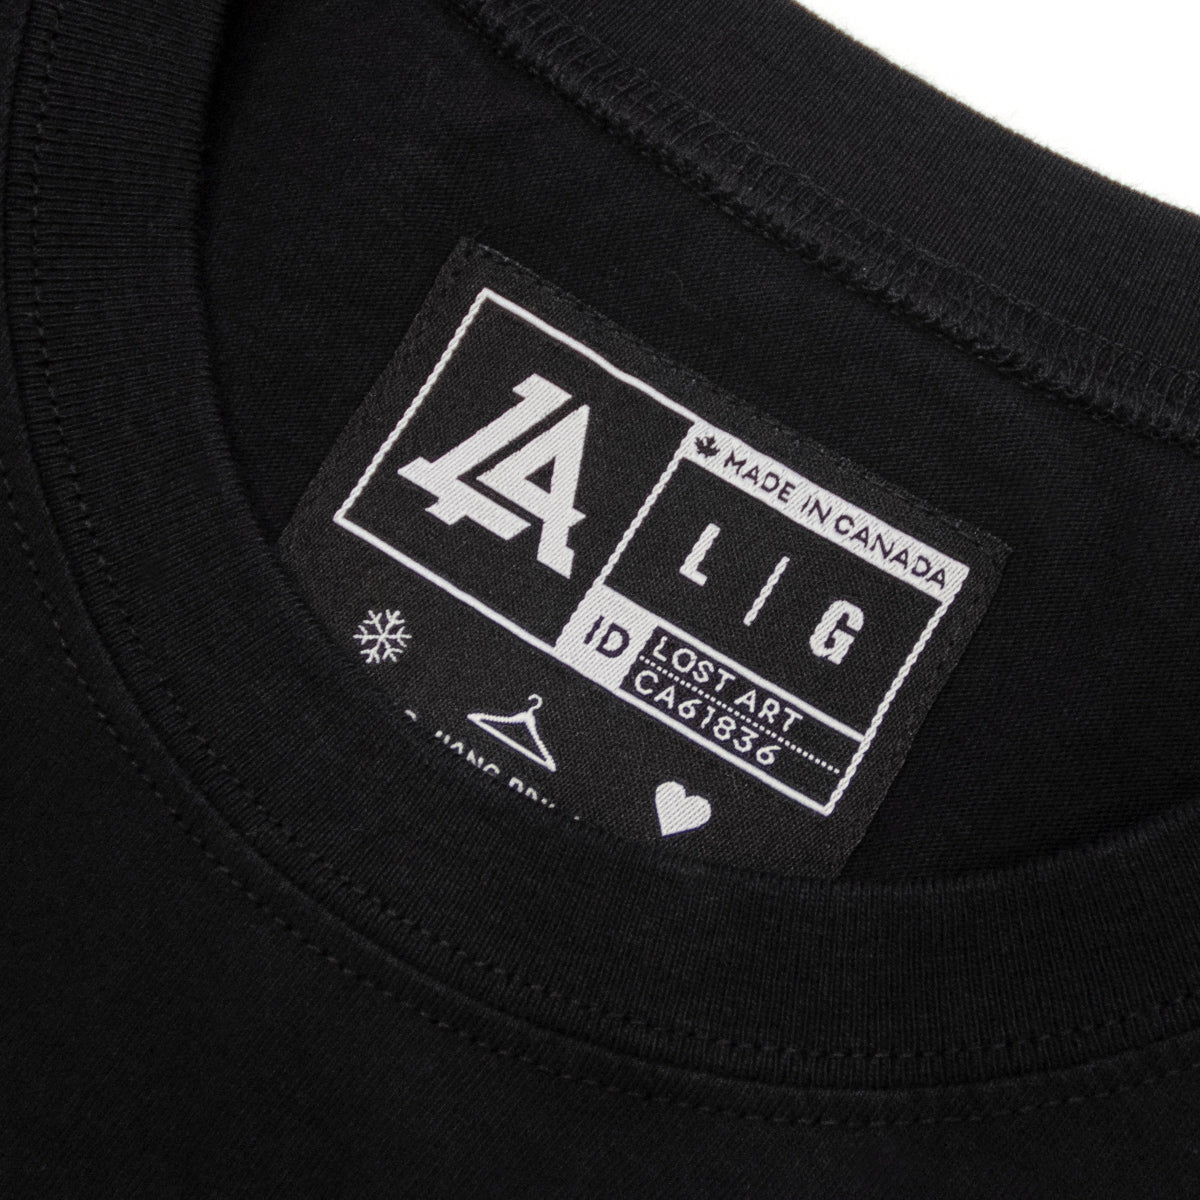 Lost Art Canada - white on black lost art icon logo tee inside tag view